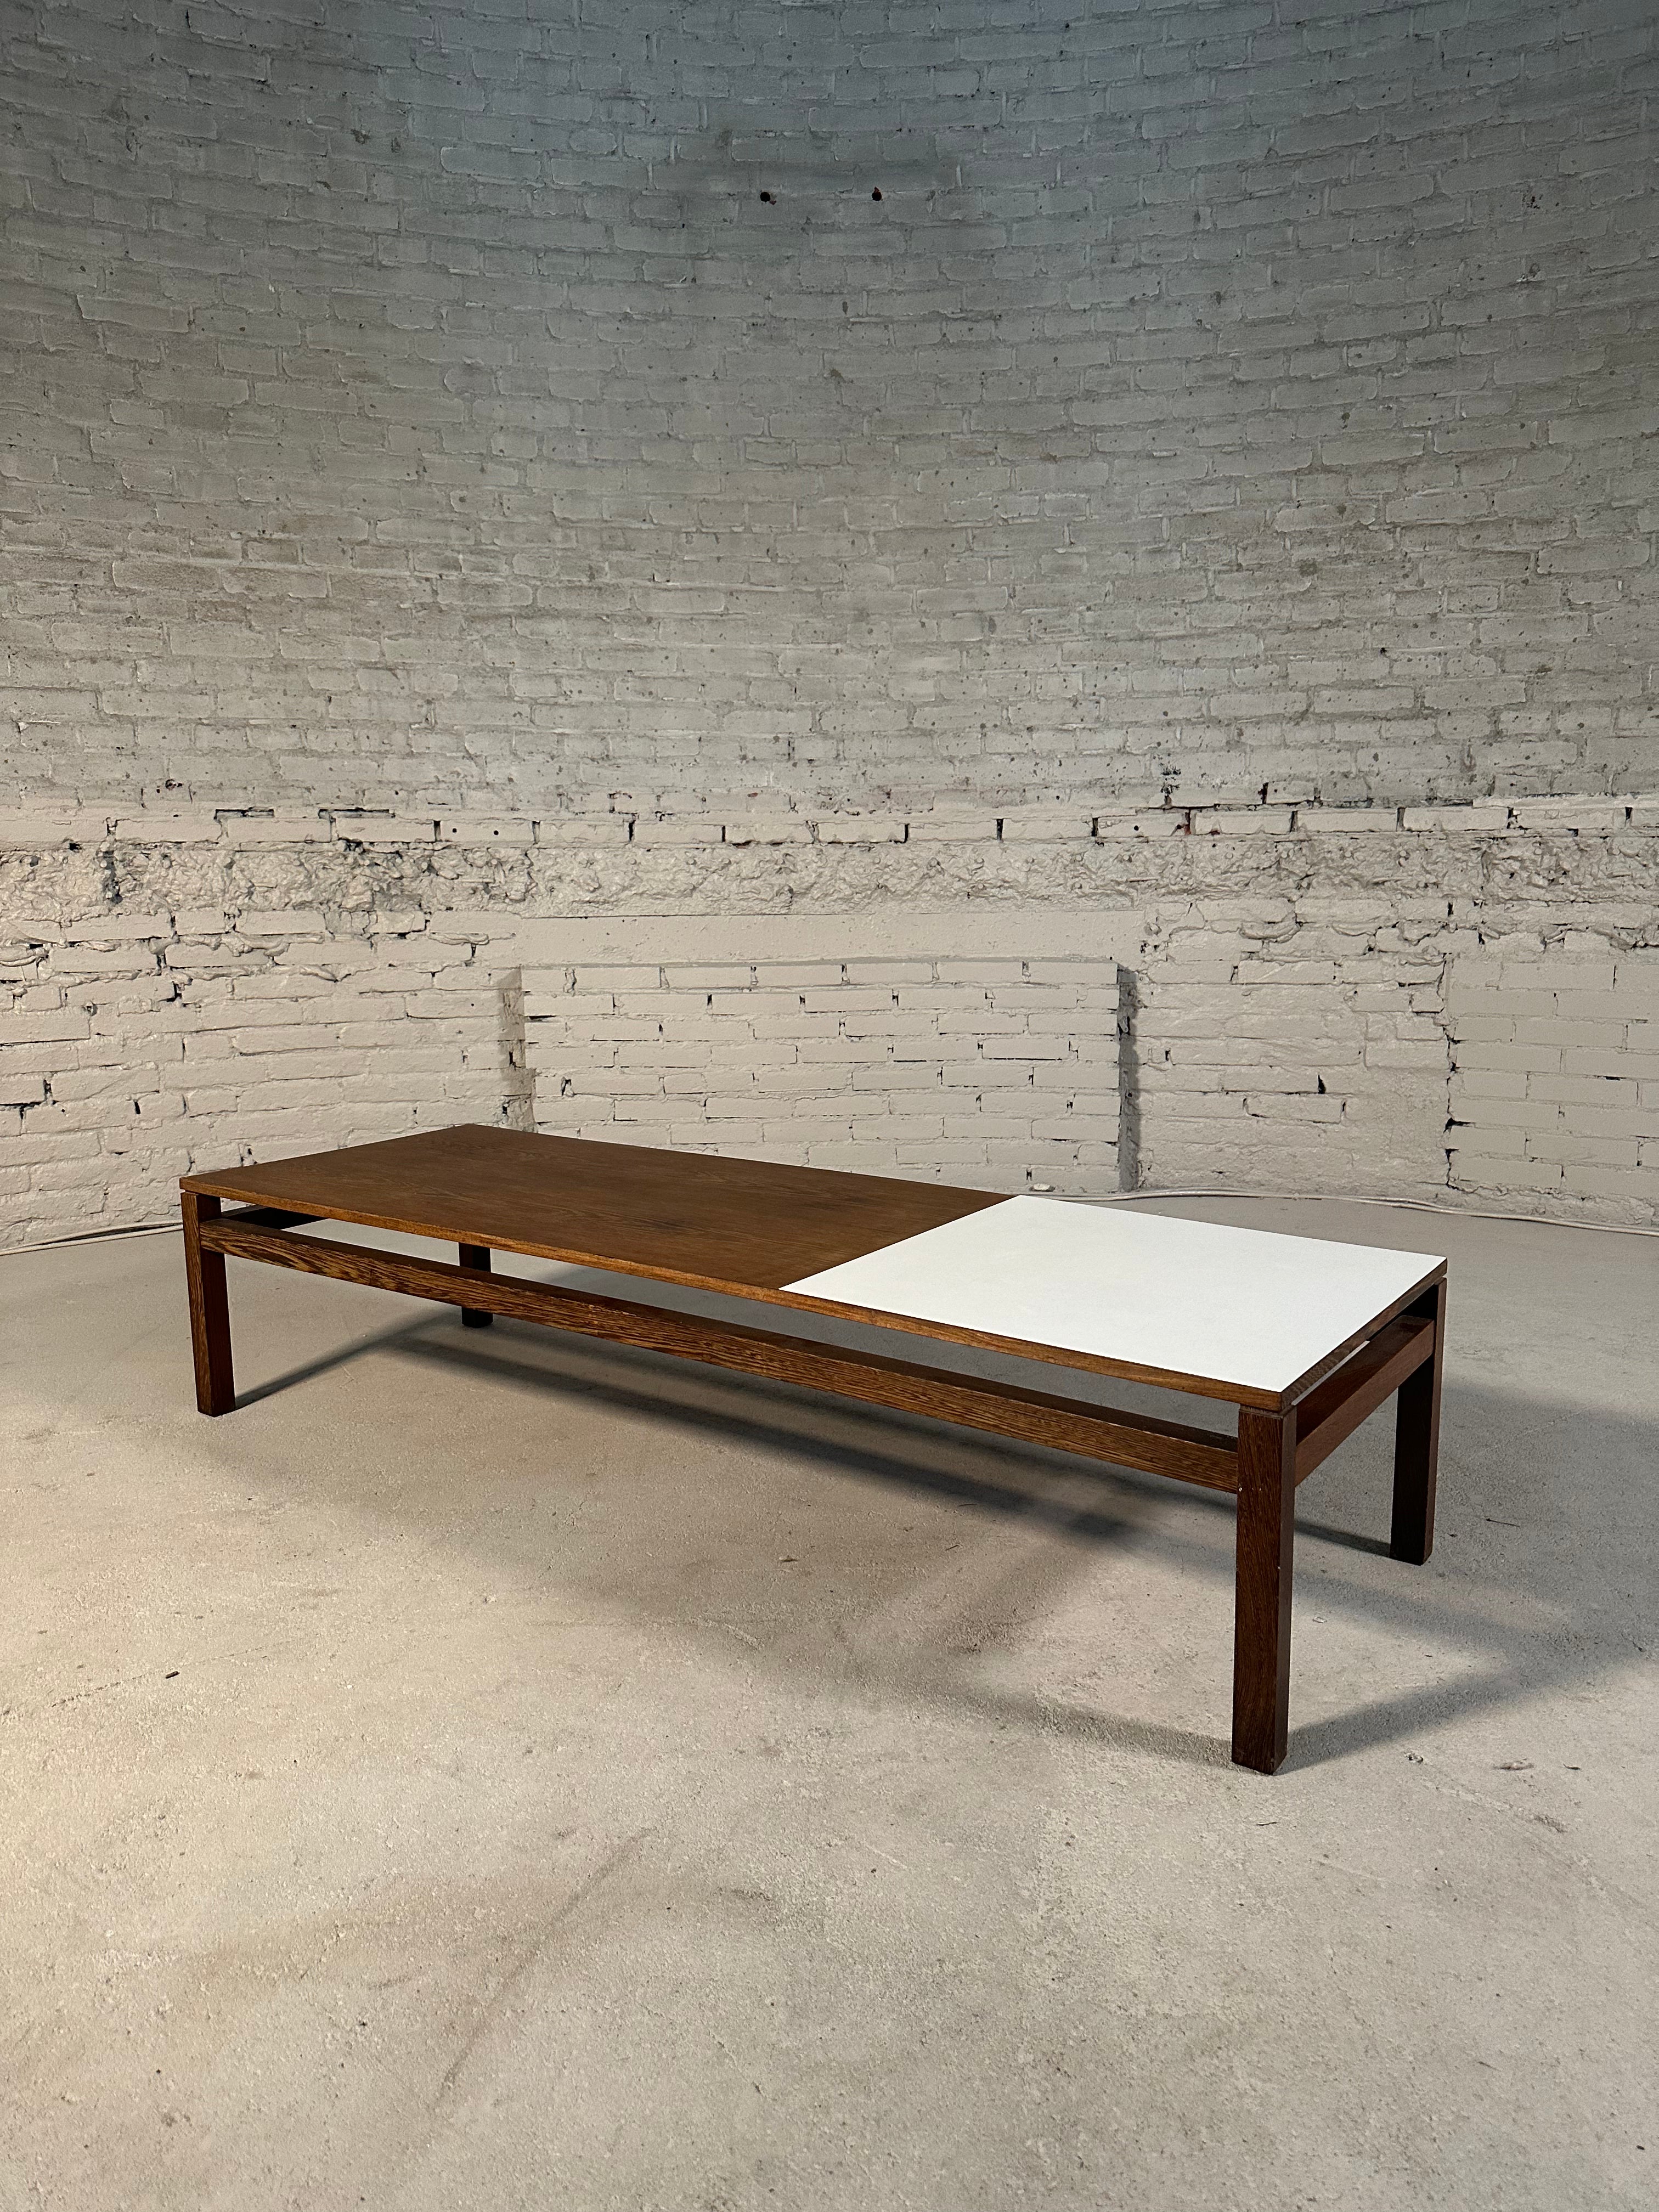 TZ03 low table by Kho Liang & Wim Crouwel for 't Spectrum